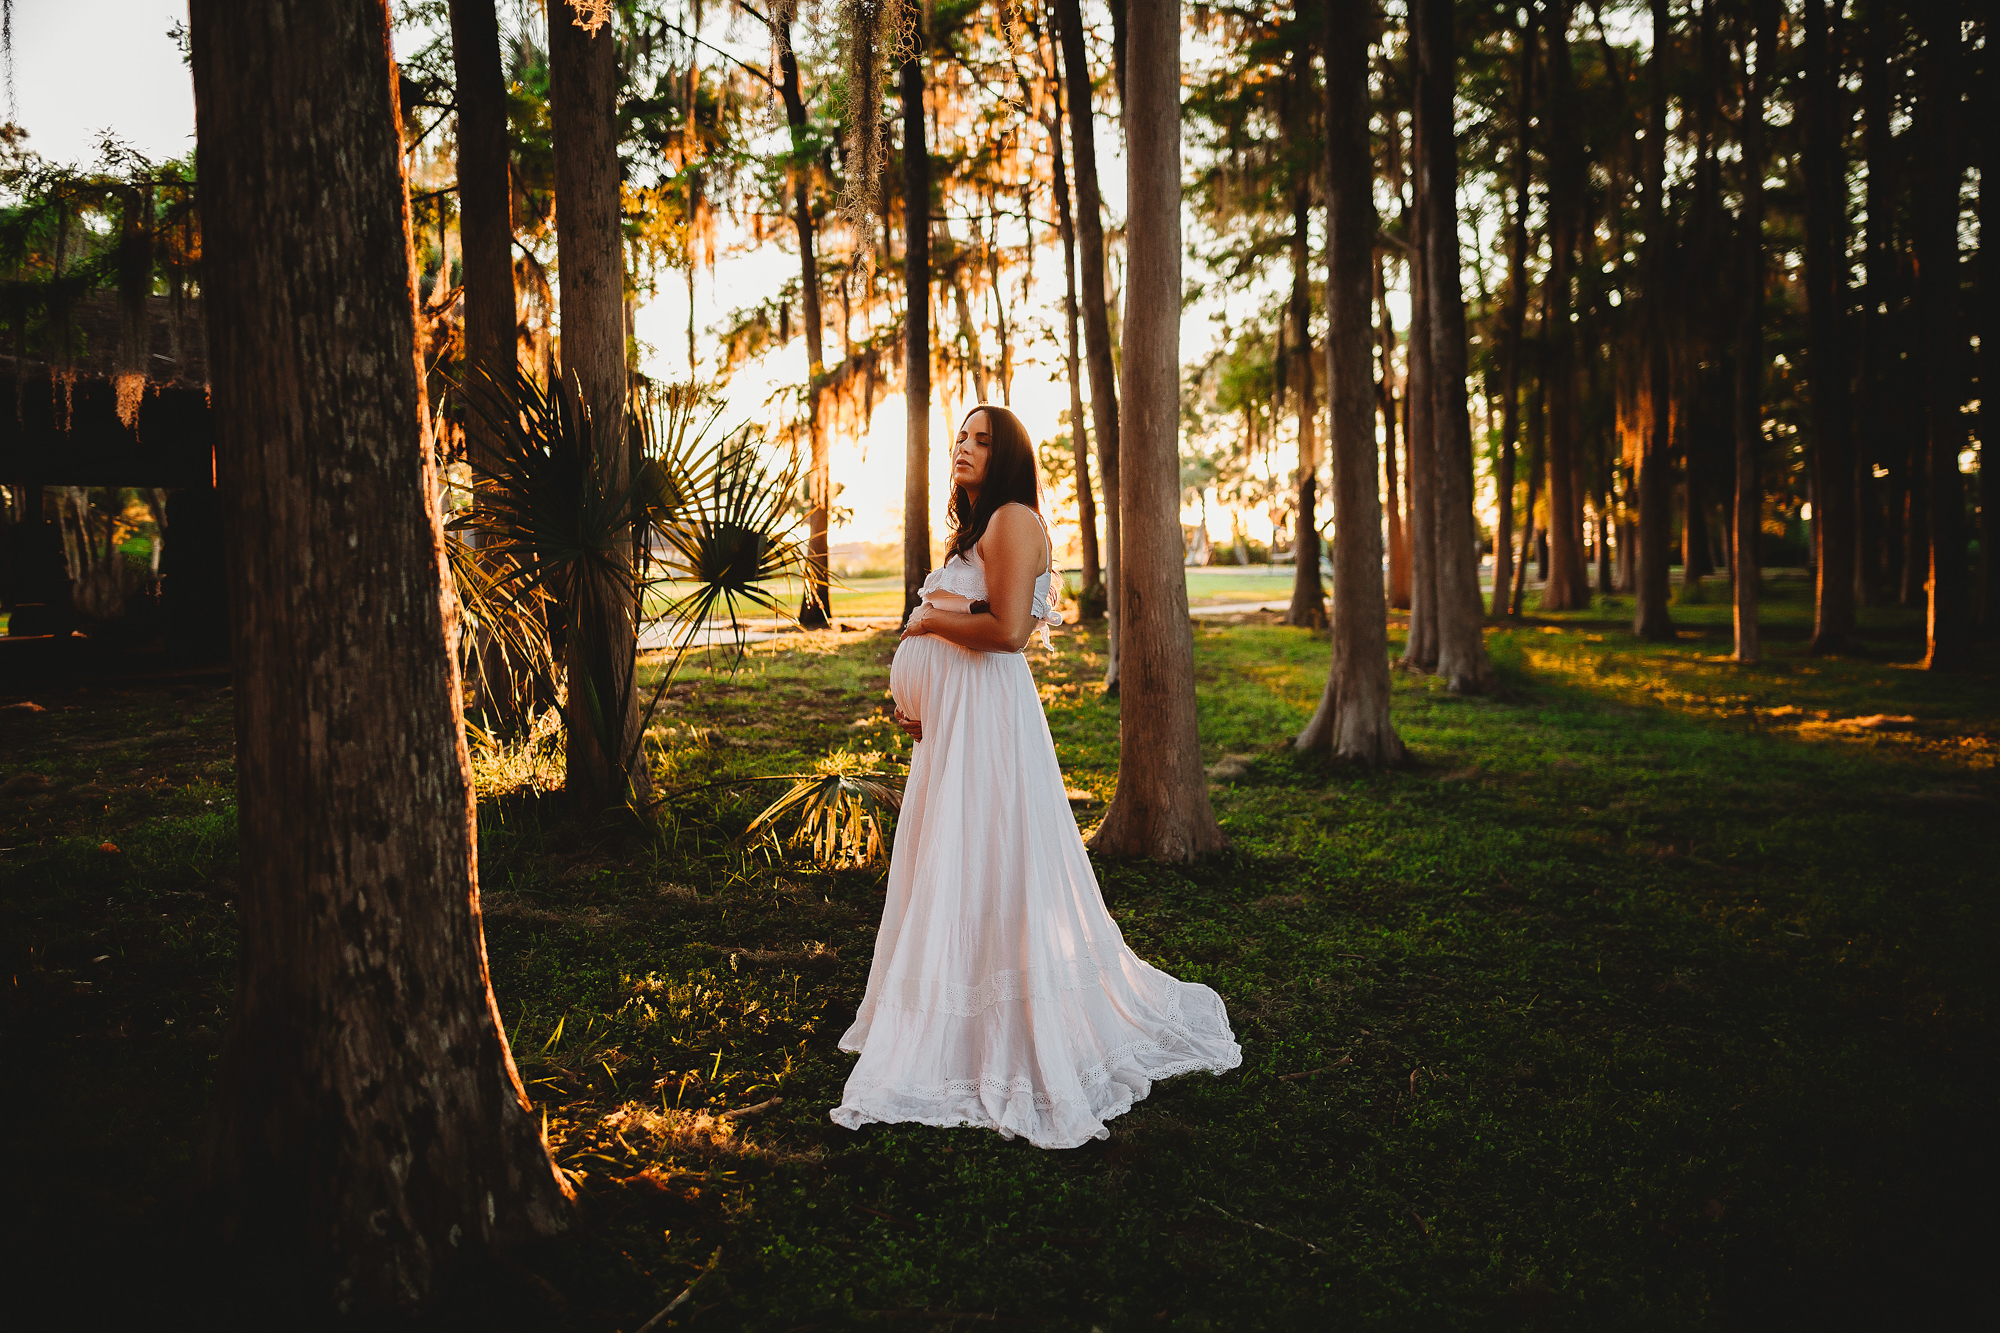  enchanting maternity portraits in the forest at sundown. John chestnut sr park maternity photo shoot in white dress with sunshine glowing through the trees 